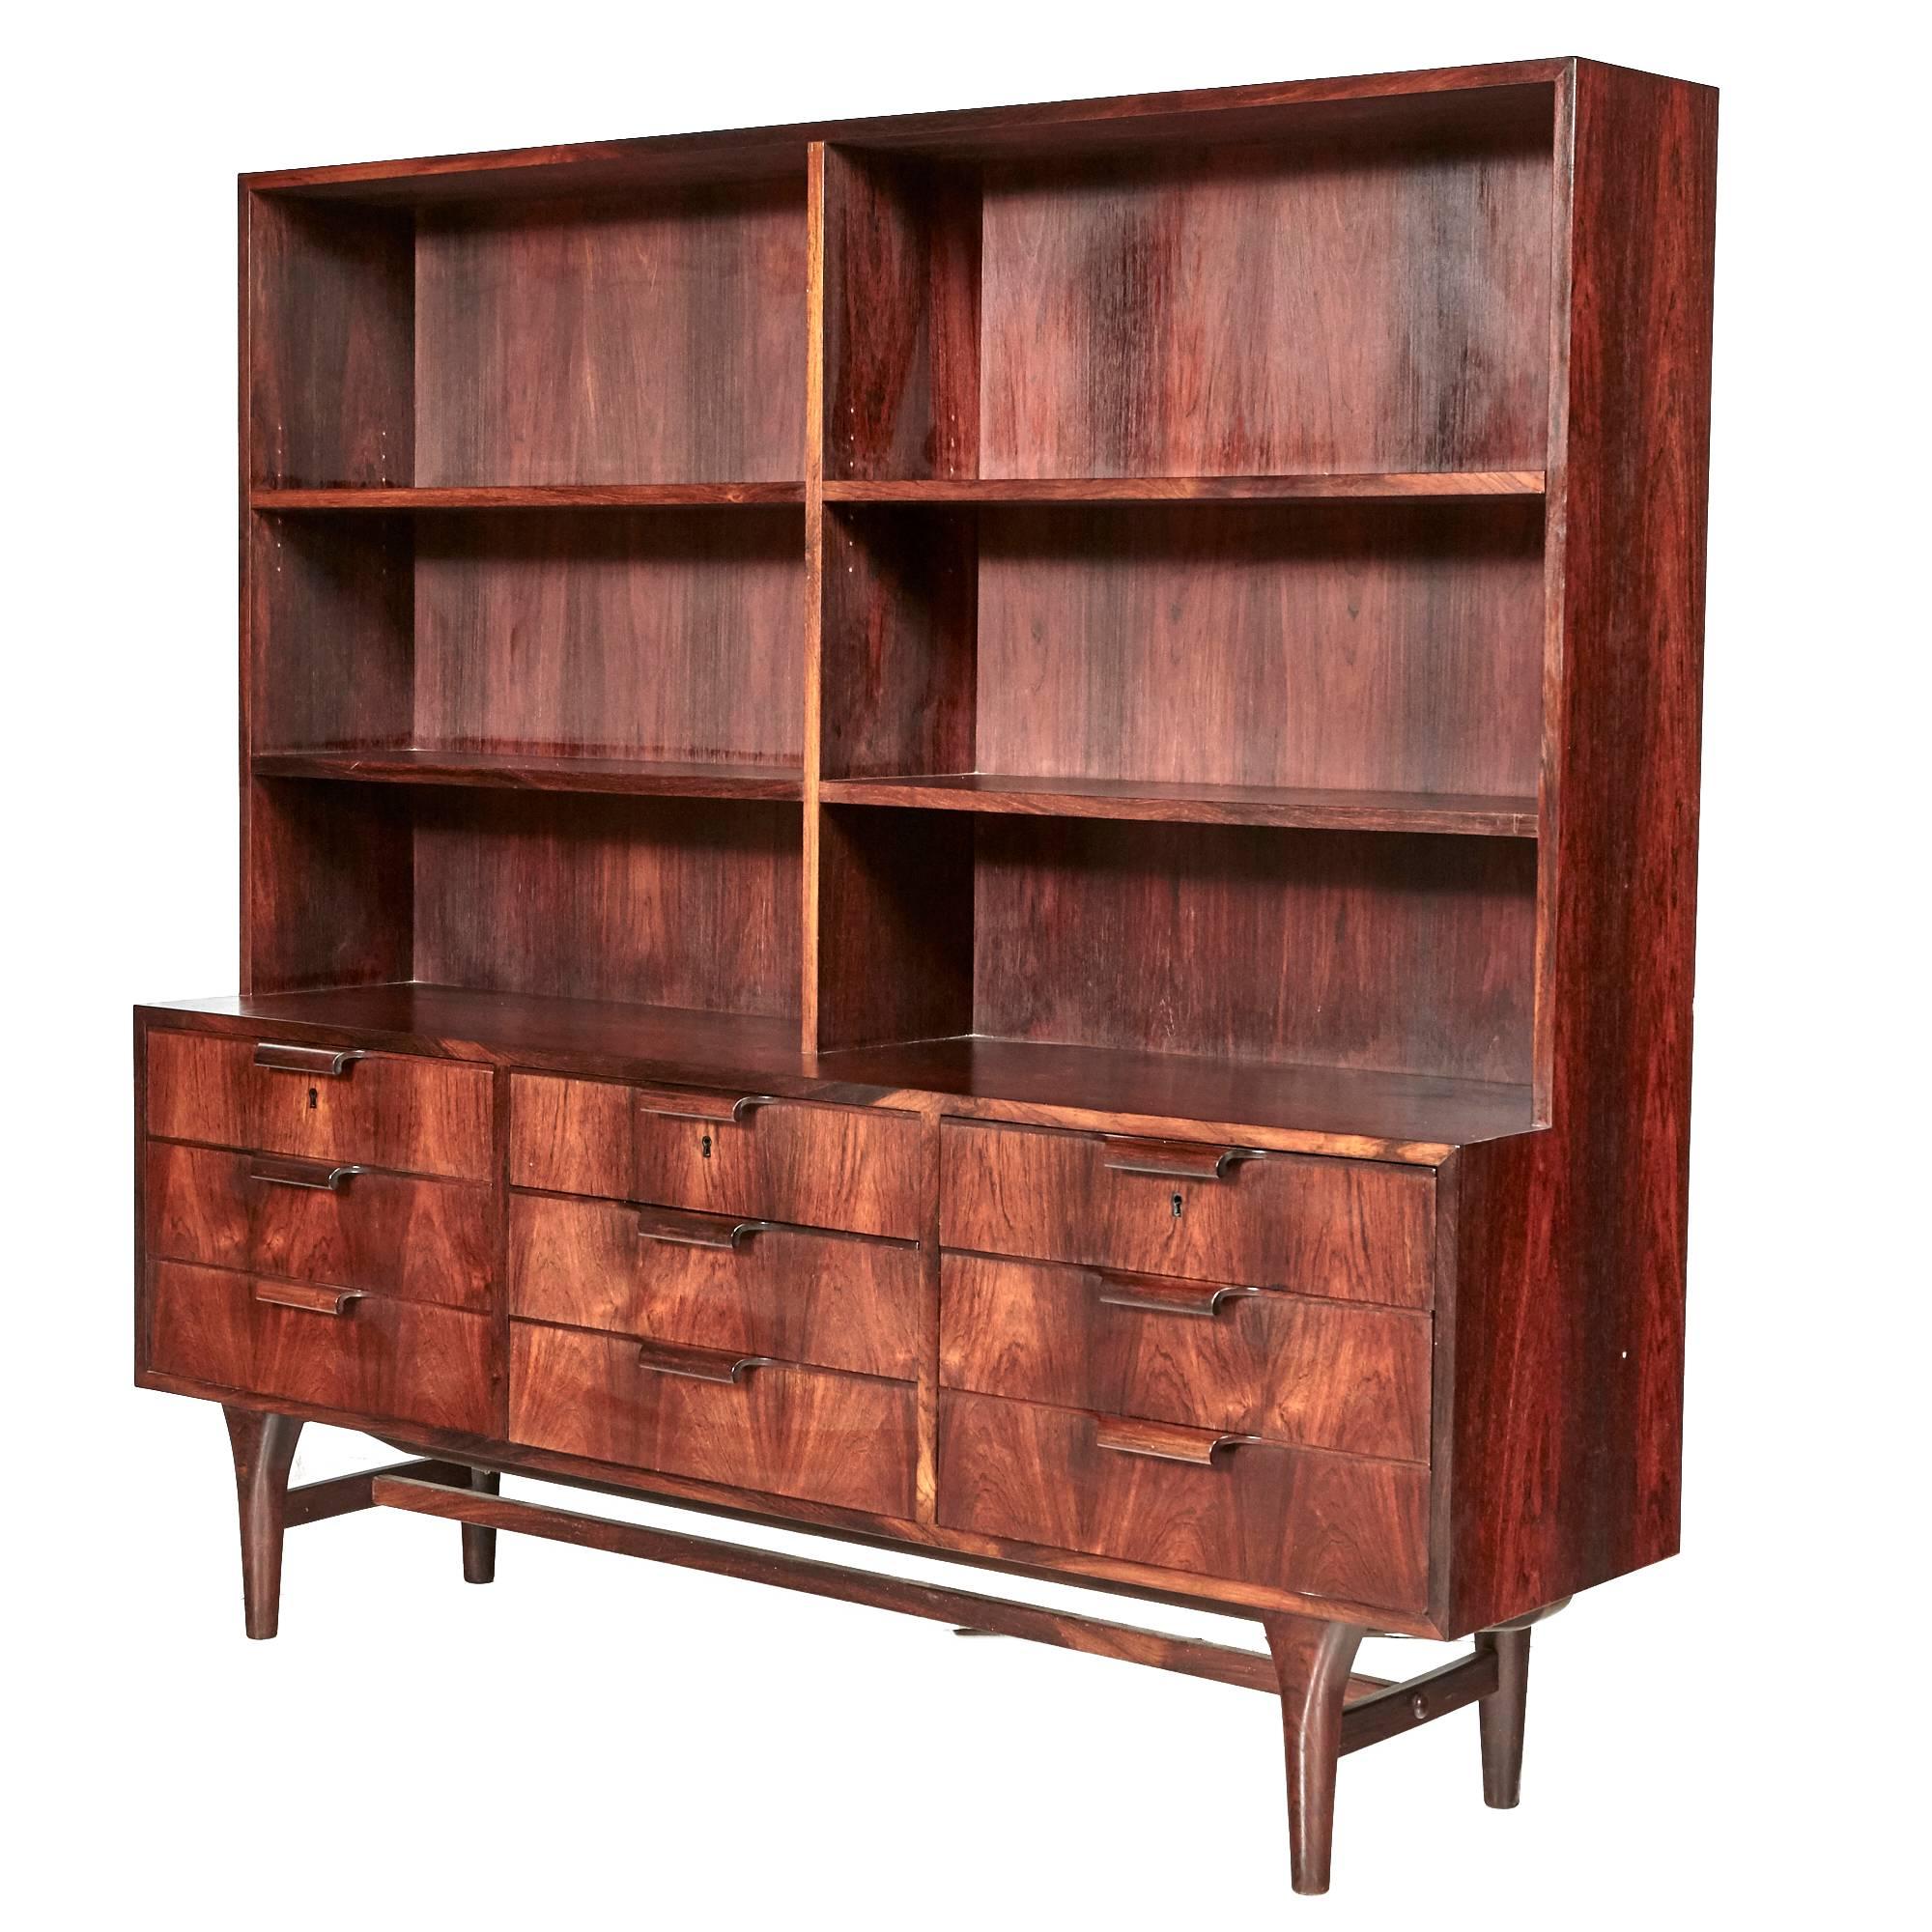 Vintage 1960s Danish storage cabinet in Brazilian rosewood with shelving and nine drawers. The drawer pulls are curved rosewood and the shelves are not adjustable. Unmarked but attributed to Gunni Omann.